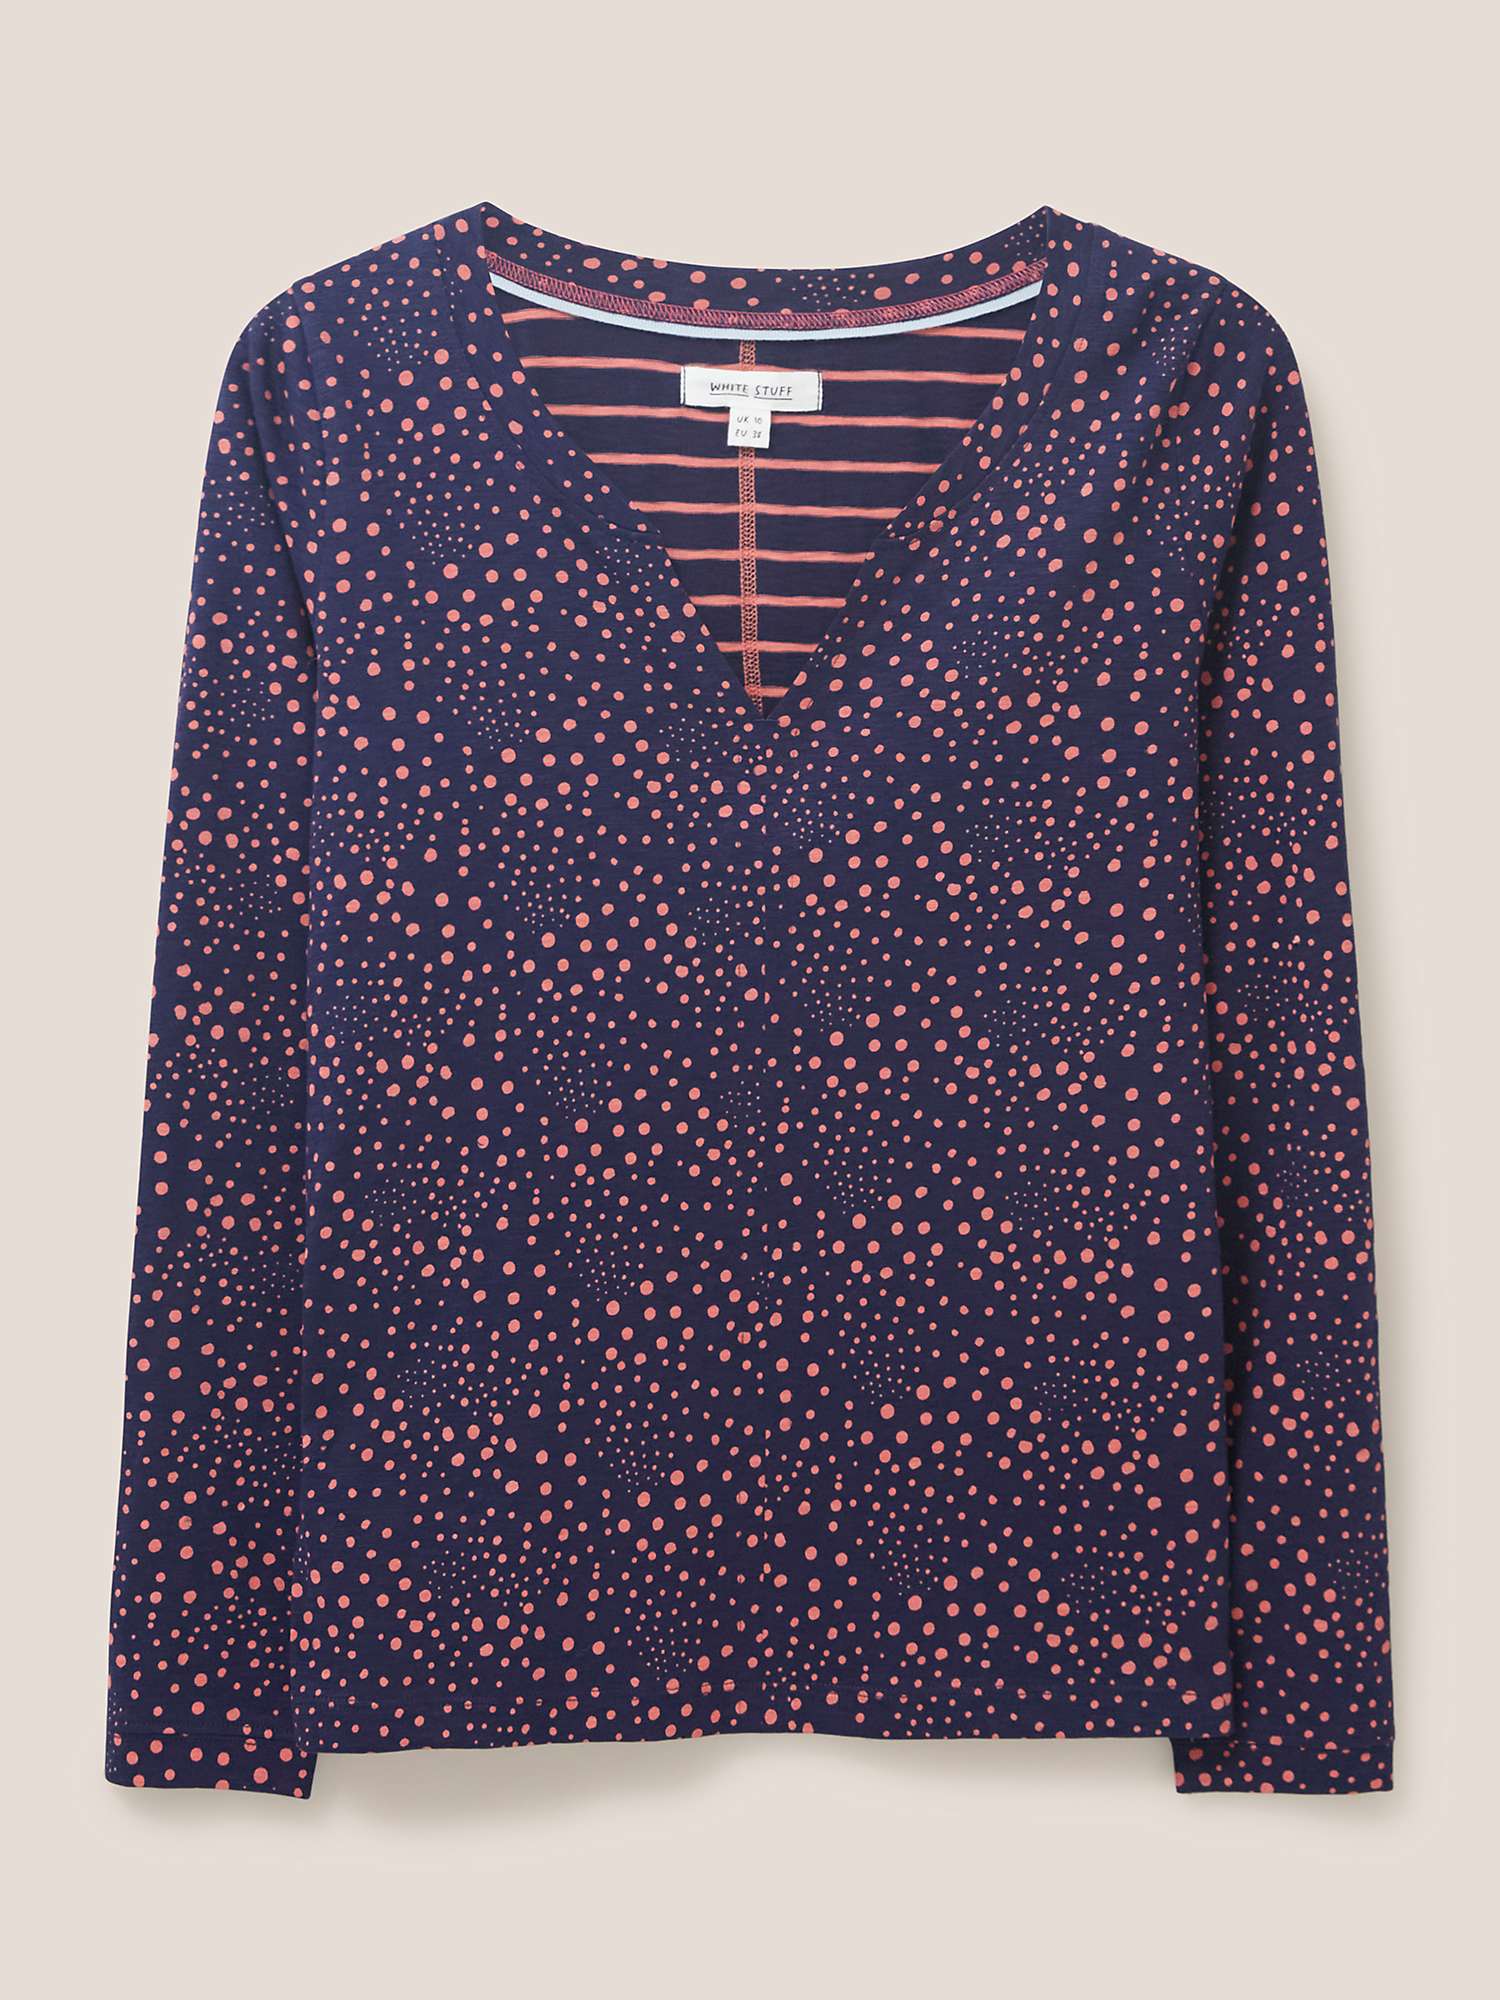 Buy White Stuff Nelly Long Sleeve Printed Cotton Top Online at johnlewis.com